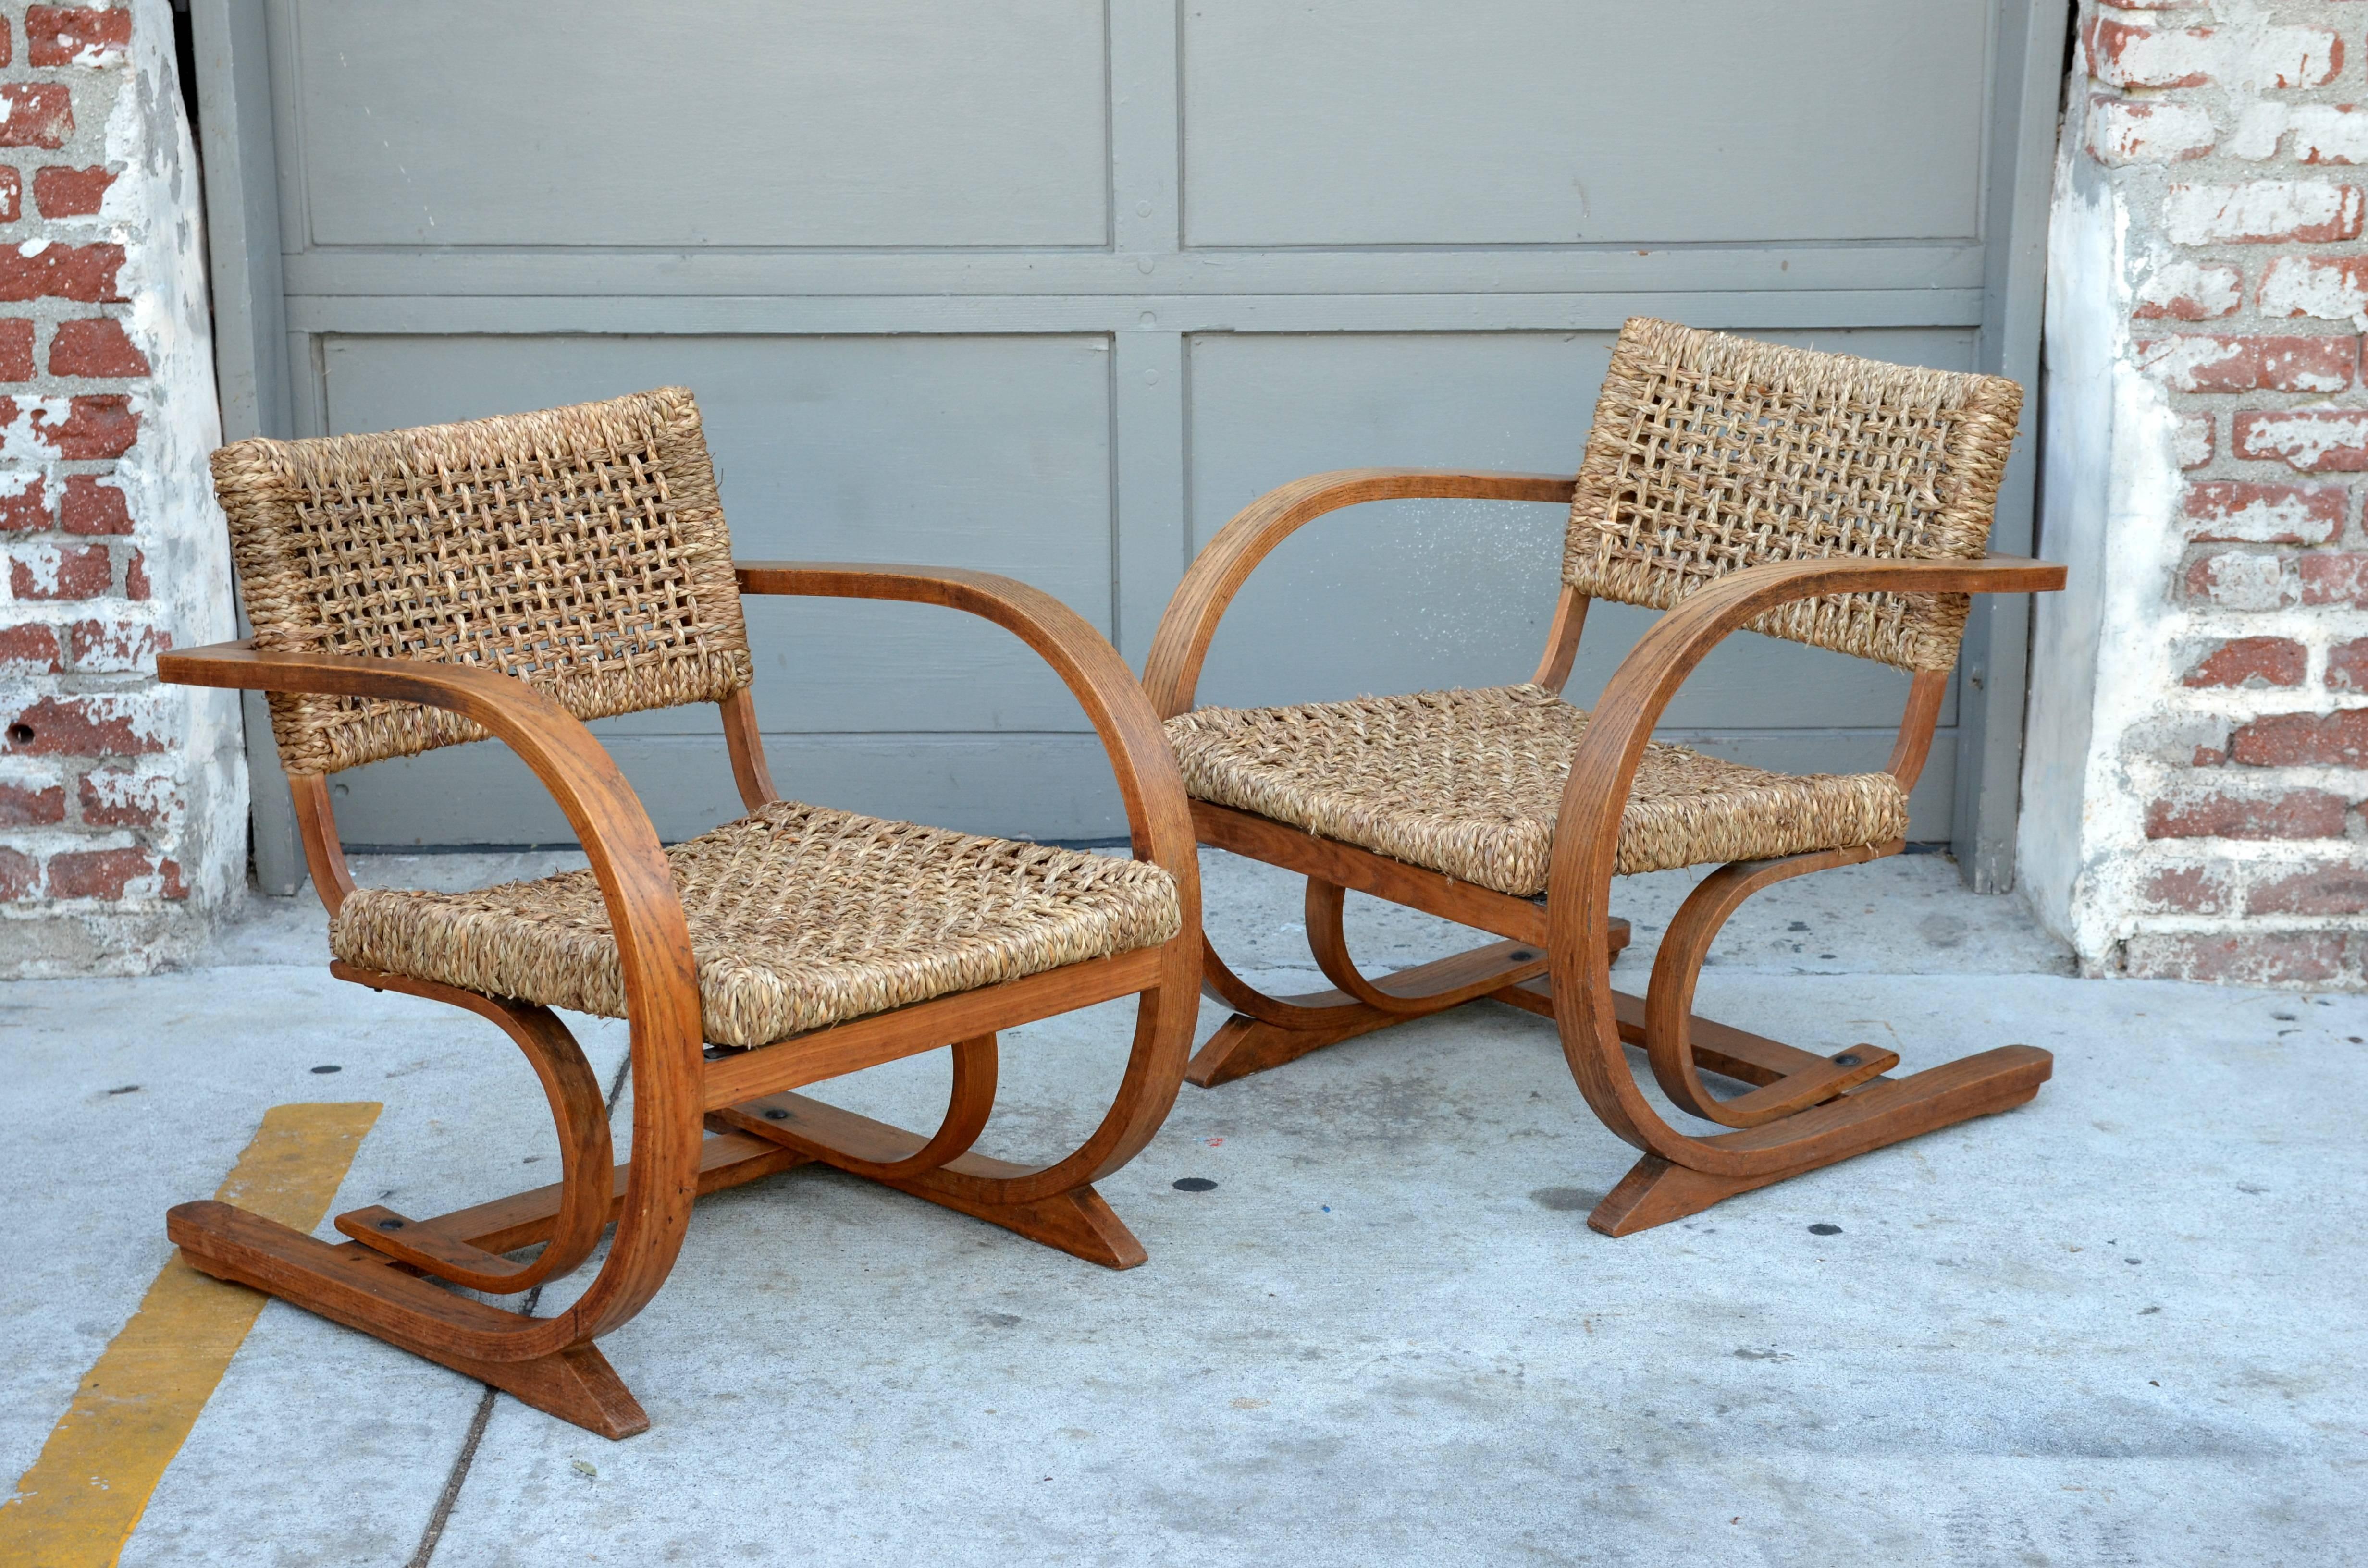 Mid-20th Century Pair of Rope Chair by Audoux-Minet for Vibo Vesoul